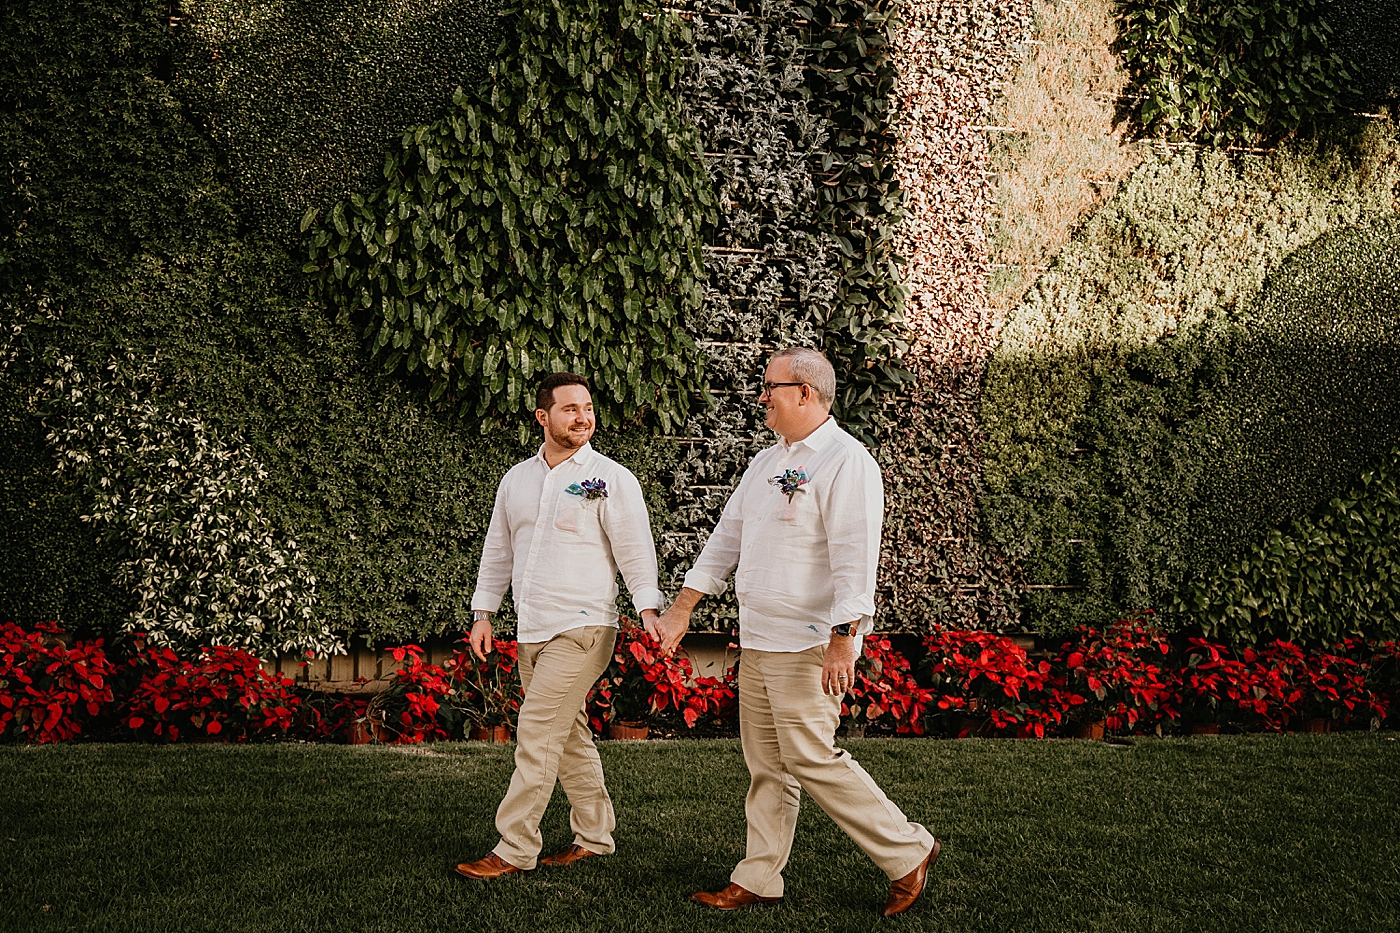 Grooms holding hands walking through garden Palm Beach Elopement Photography captured by South Florida Photographer Krystal Capone Photography 